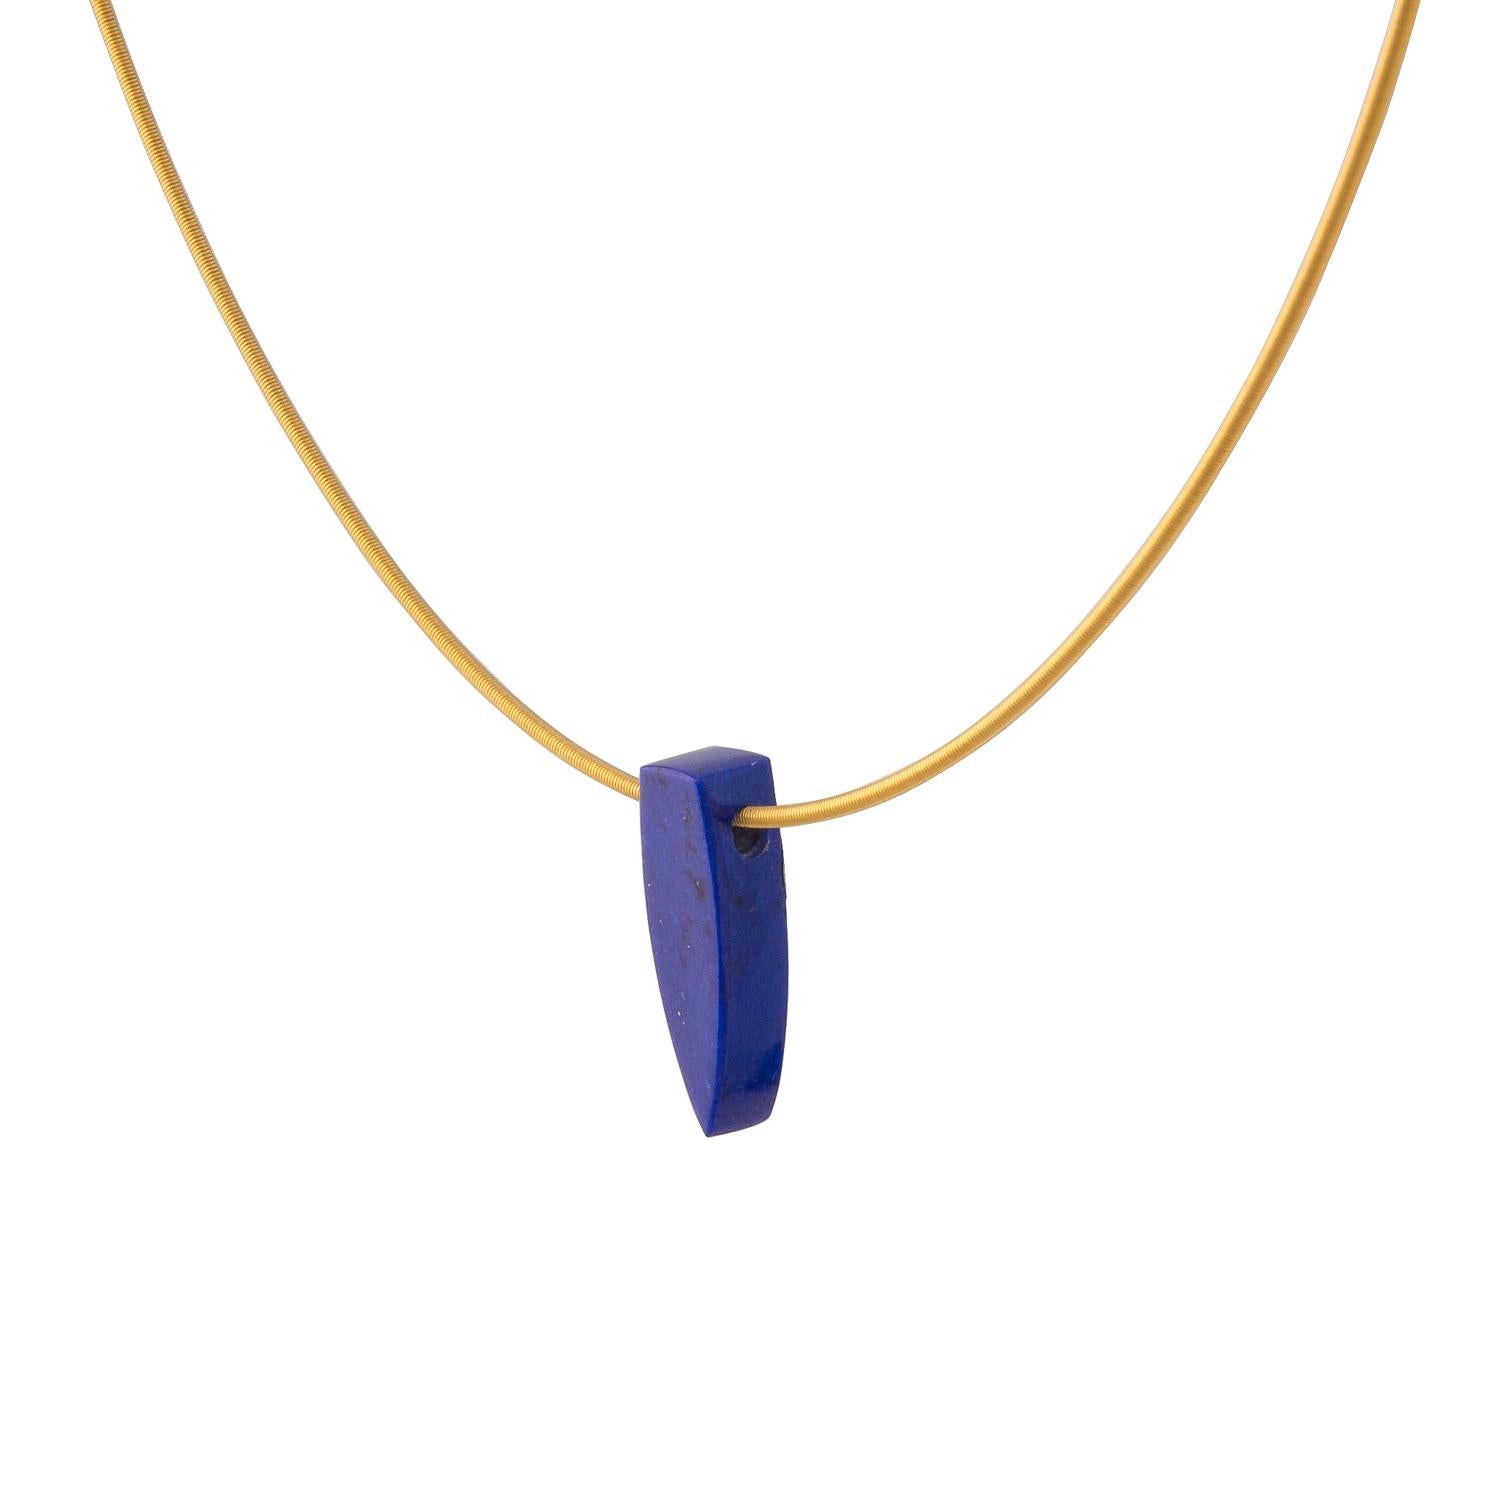 This boat shape is a unique piece of Lapis Lazuli, which has been carved by hand from rough stone in our Northern Irish workshop. This piece of clear ultramarine blue Lapis Lazuli, with minimal gold pyrite inclusions, measures 25 mm long and weighs